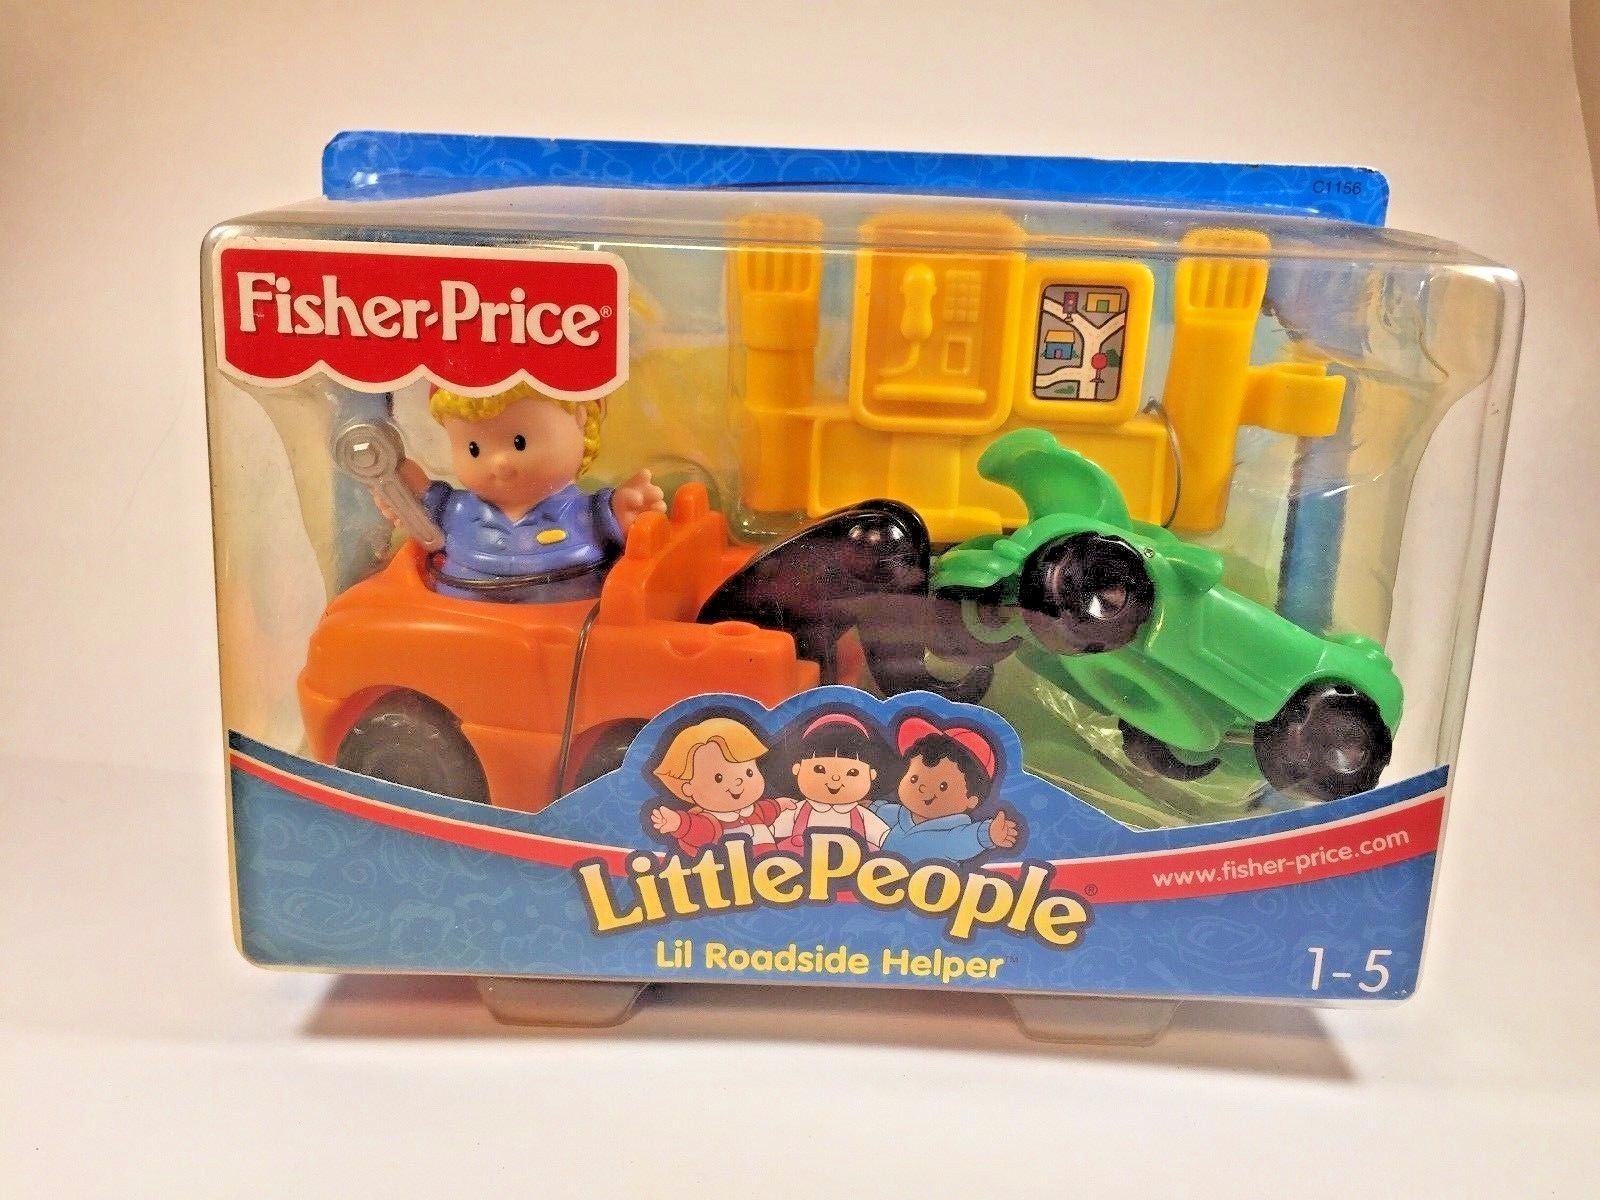 fisher price caring for animals